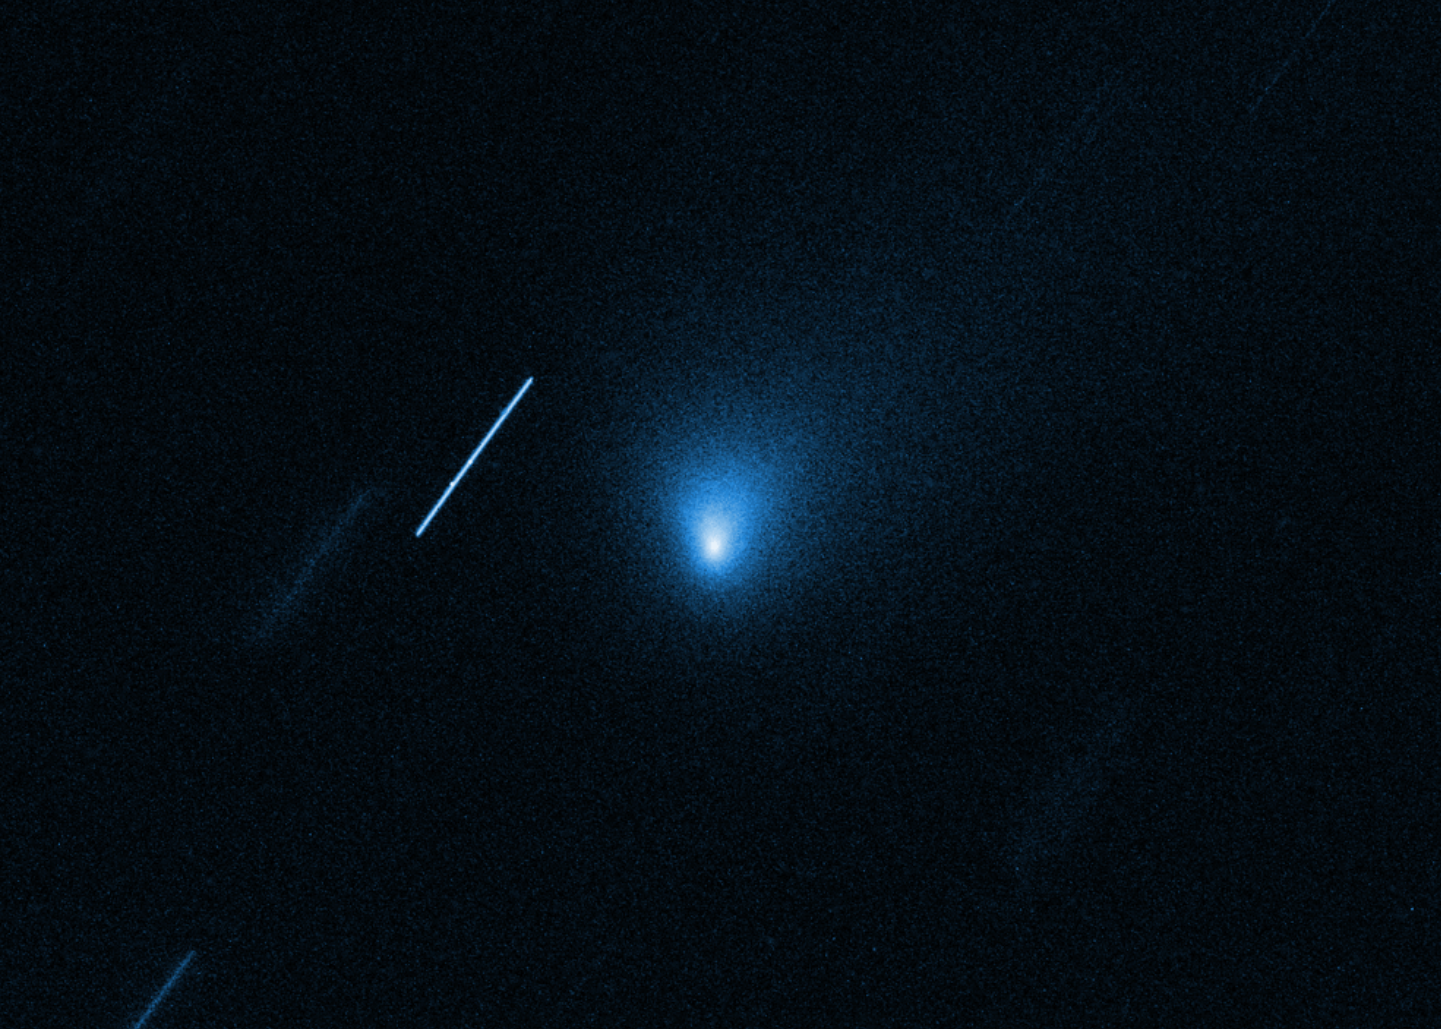 NASA Captured Stunning New Images of the Interstellar Comet in Our Solar System picture